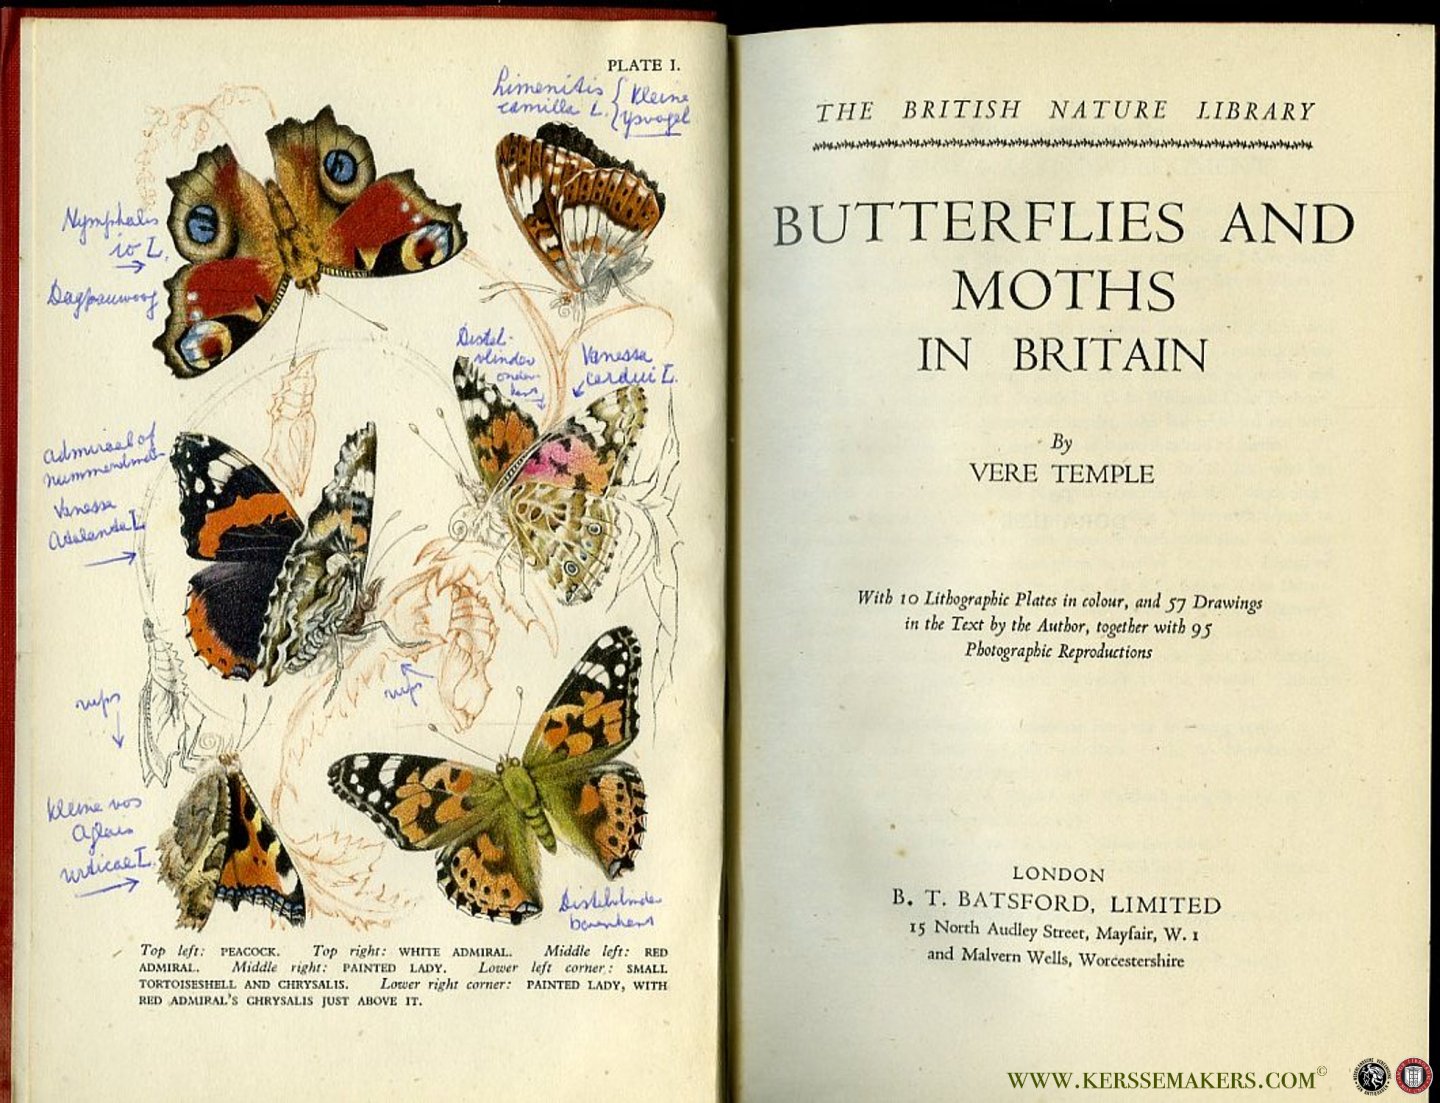 TEMPLE, Vere - Butterflies and Moths in Britain. With 10 Lithographic Plates in colour, and 57 Drawings in the Text by the Author, together with 95 Photografic reproductions.